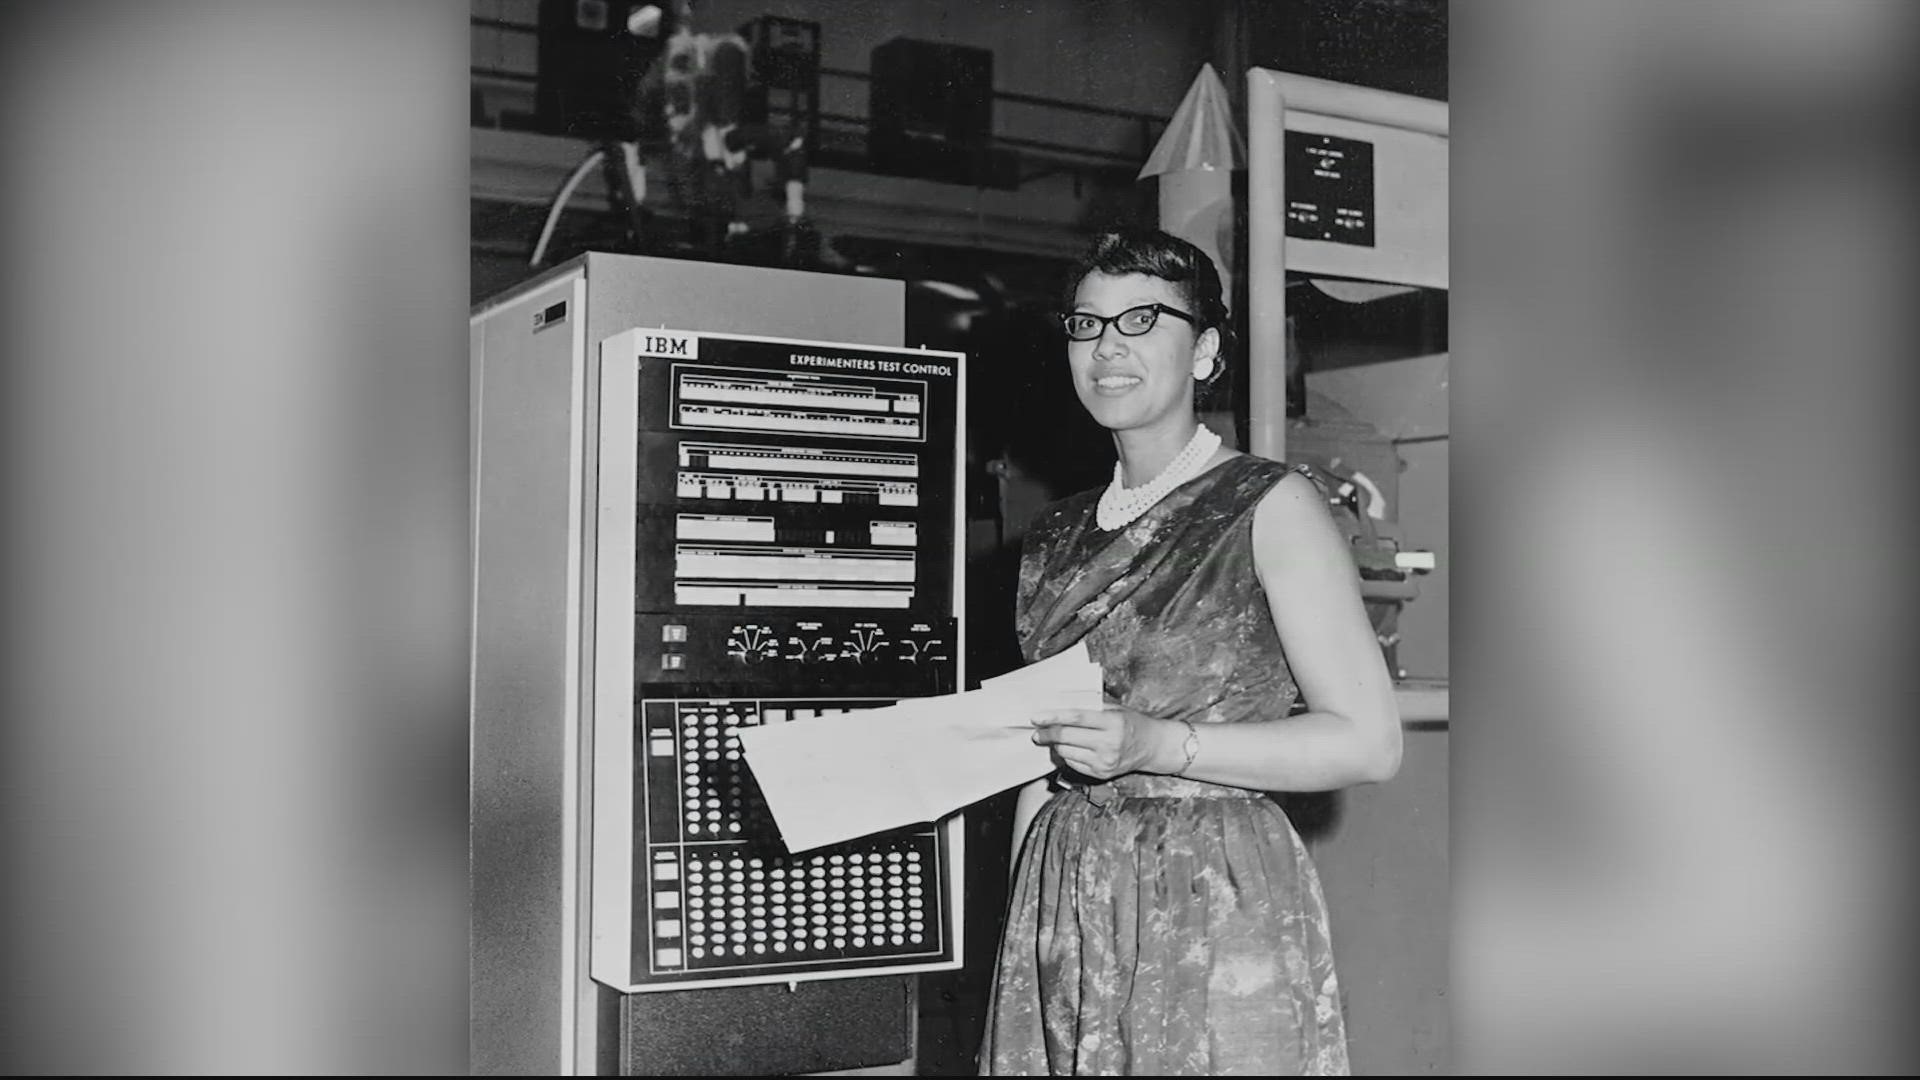 The lunar mountain is named after NASA mathematician and computer programmer Melba Roy Mouton